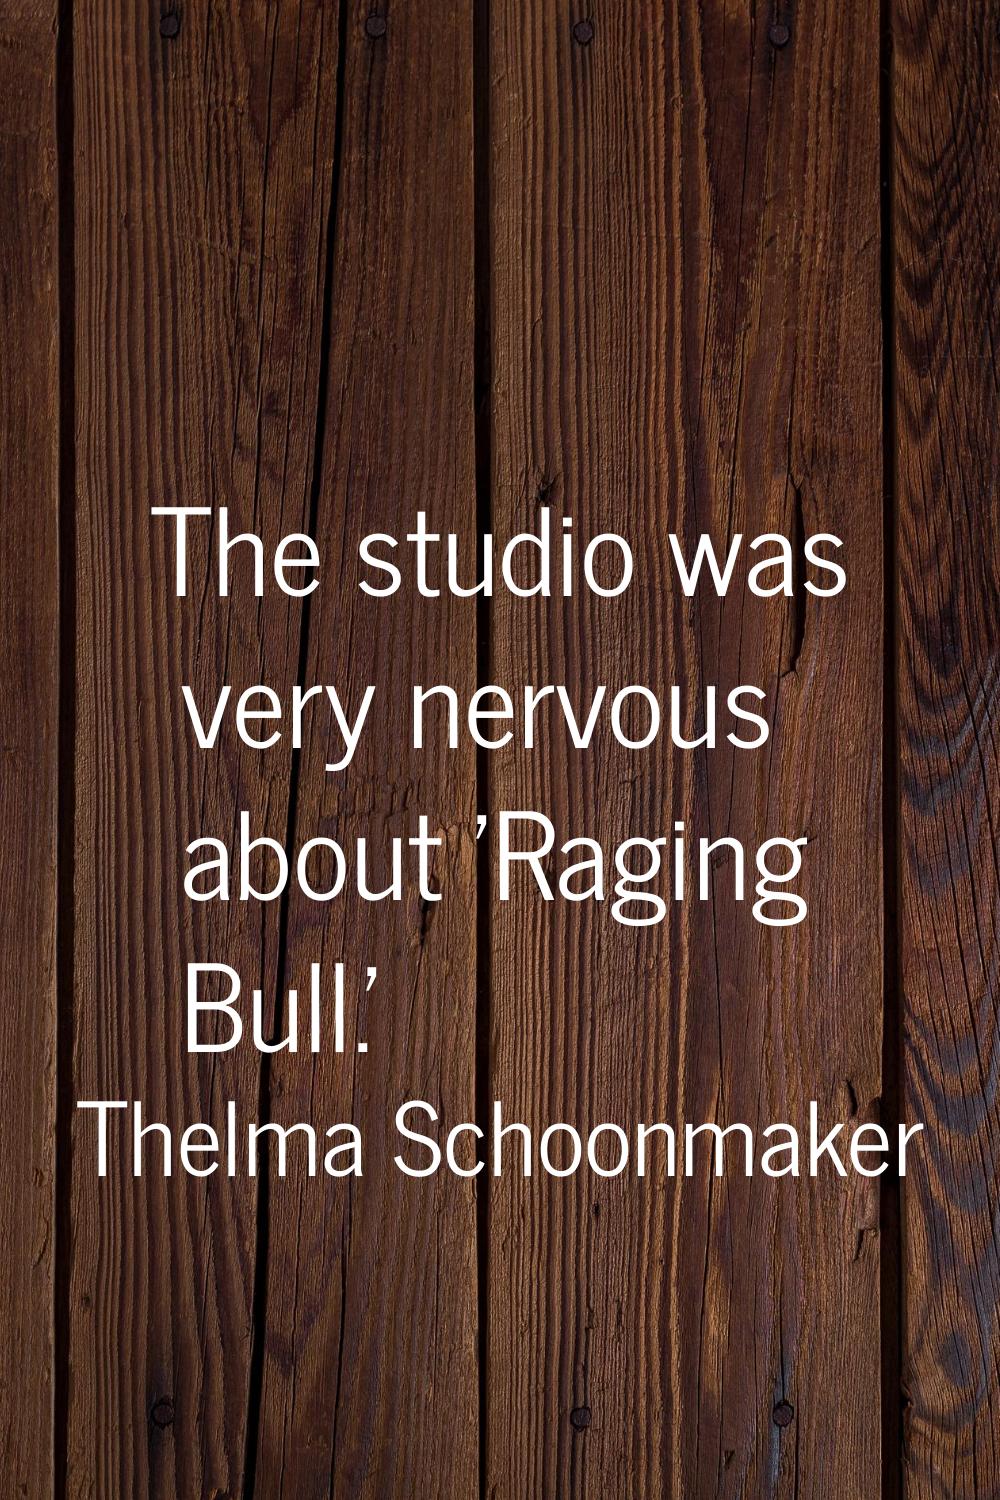 The studio was very nervous about 'Raging Bull.'